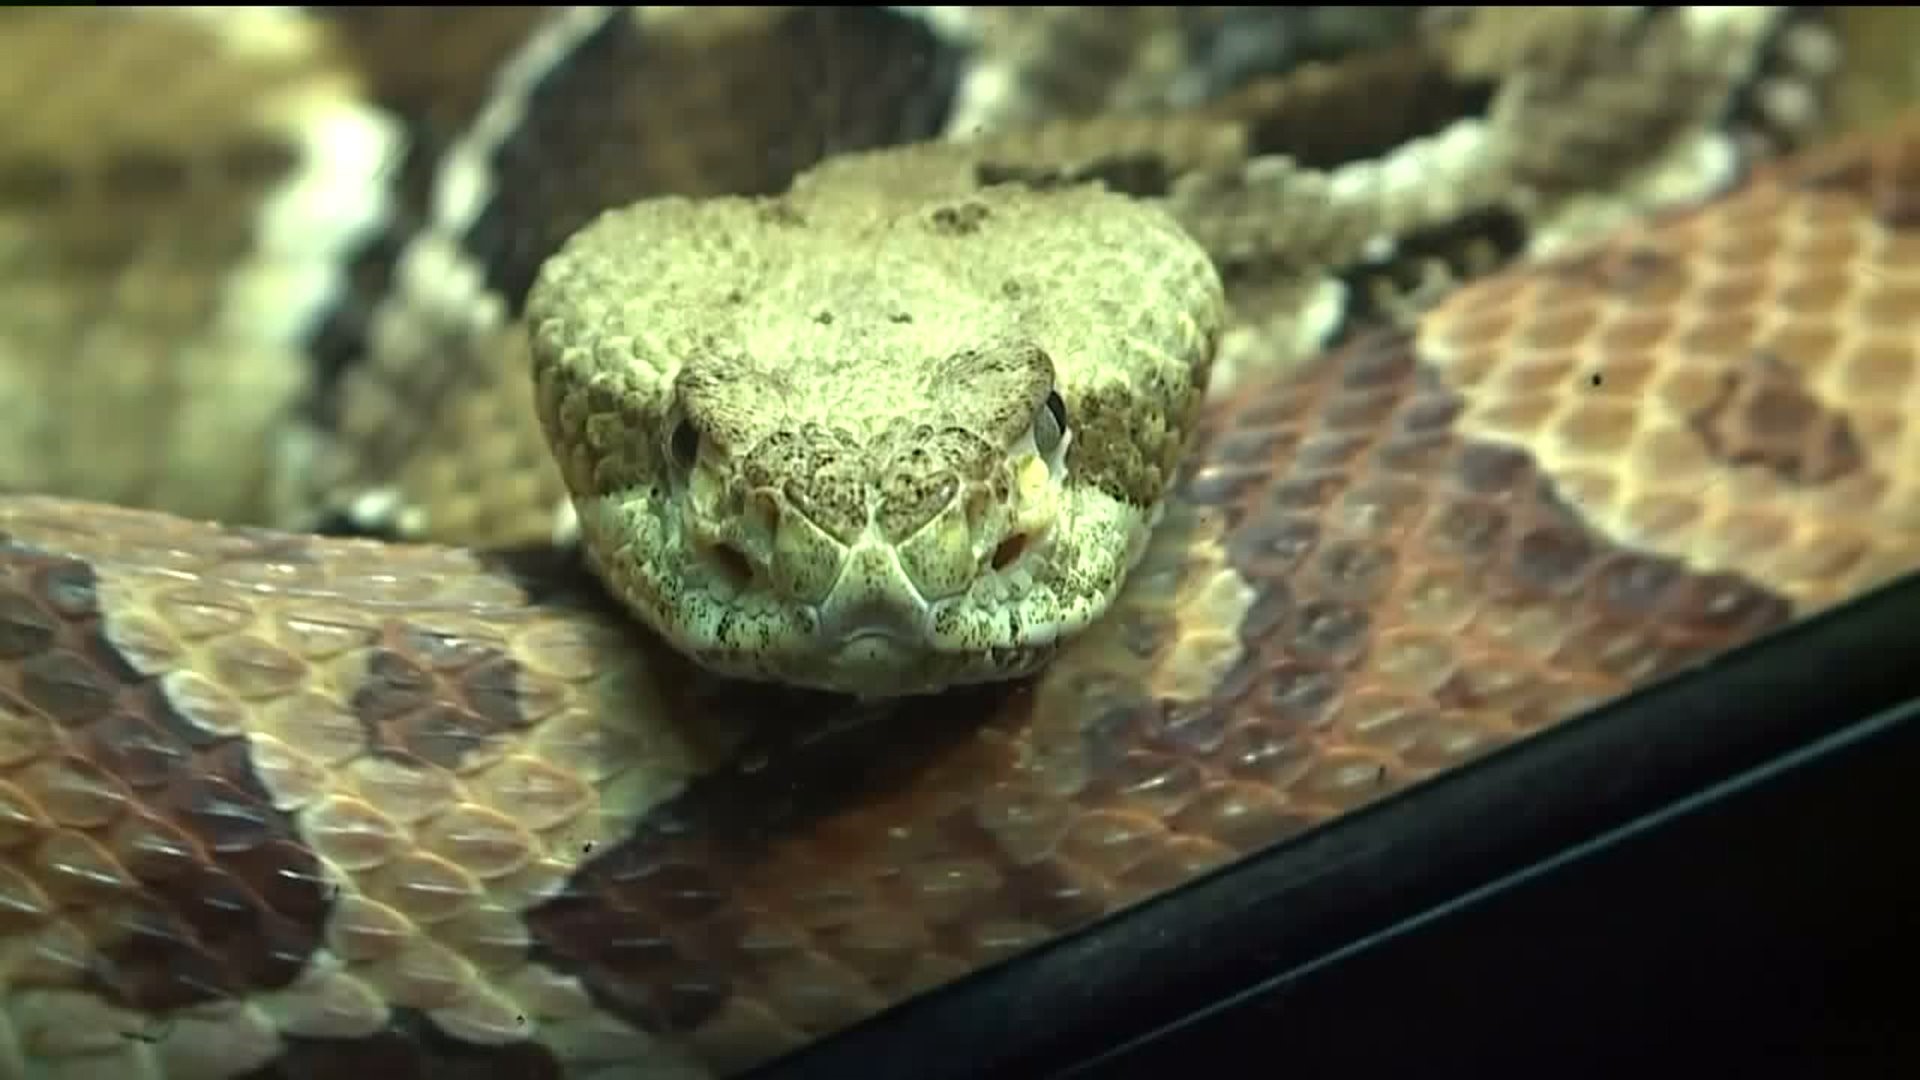 Man Sorry for Capturing and Trying to Sell Rattlesnakes